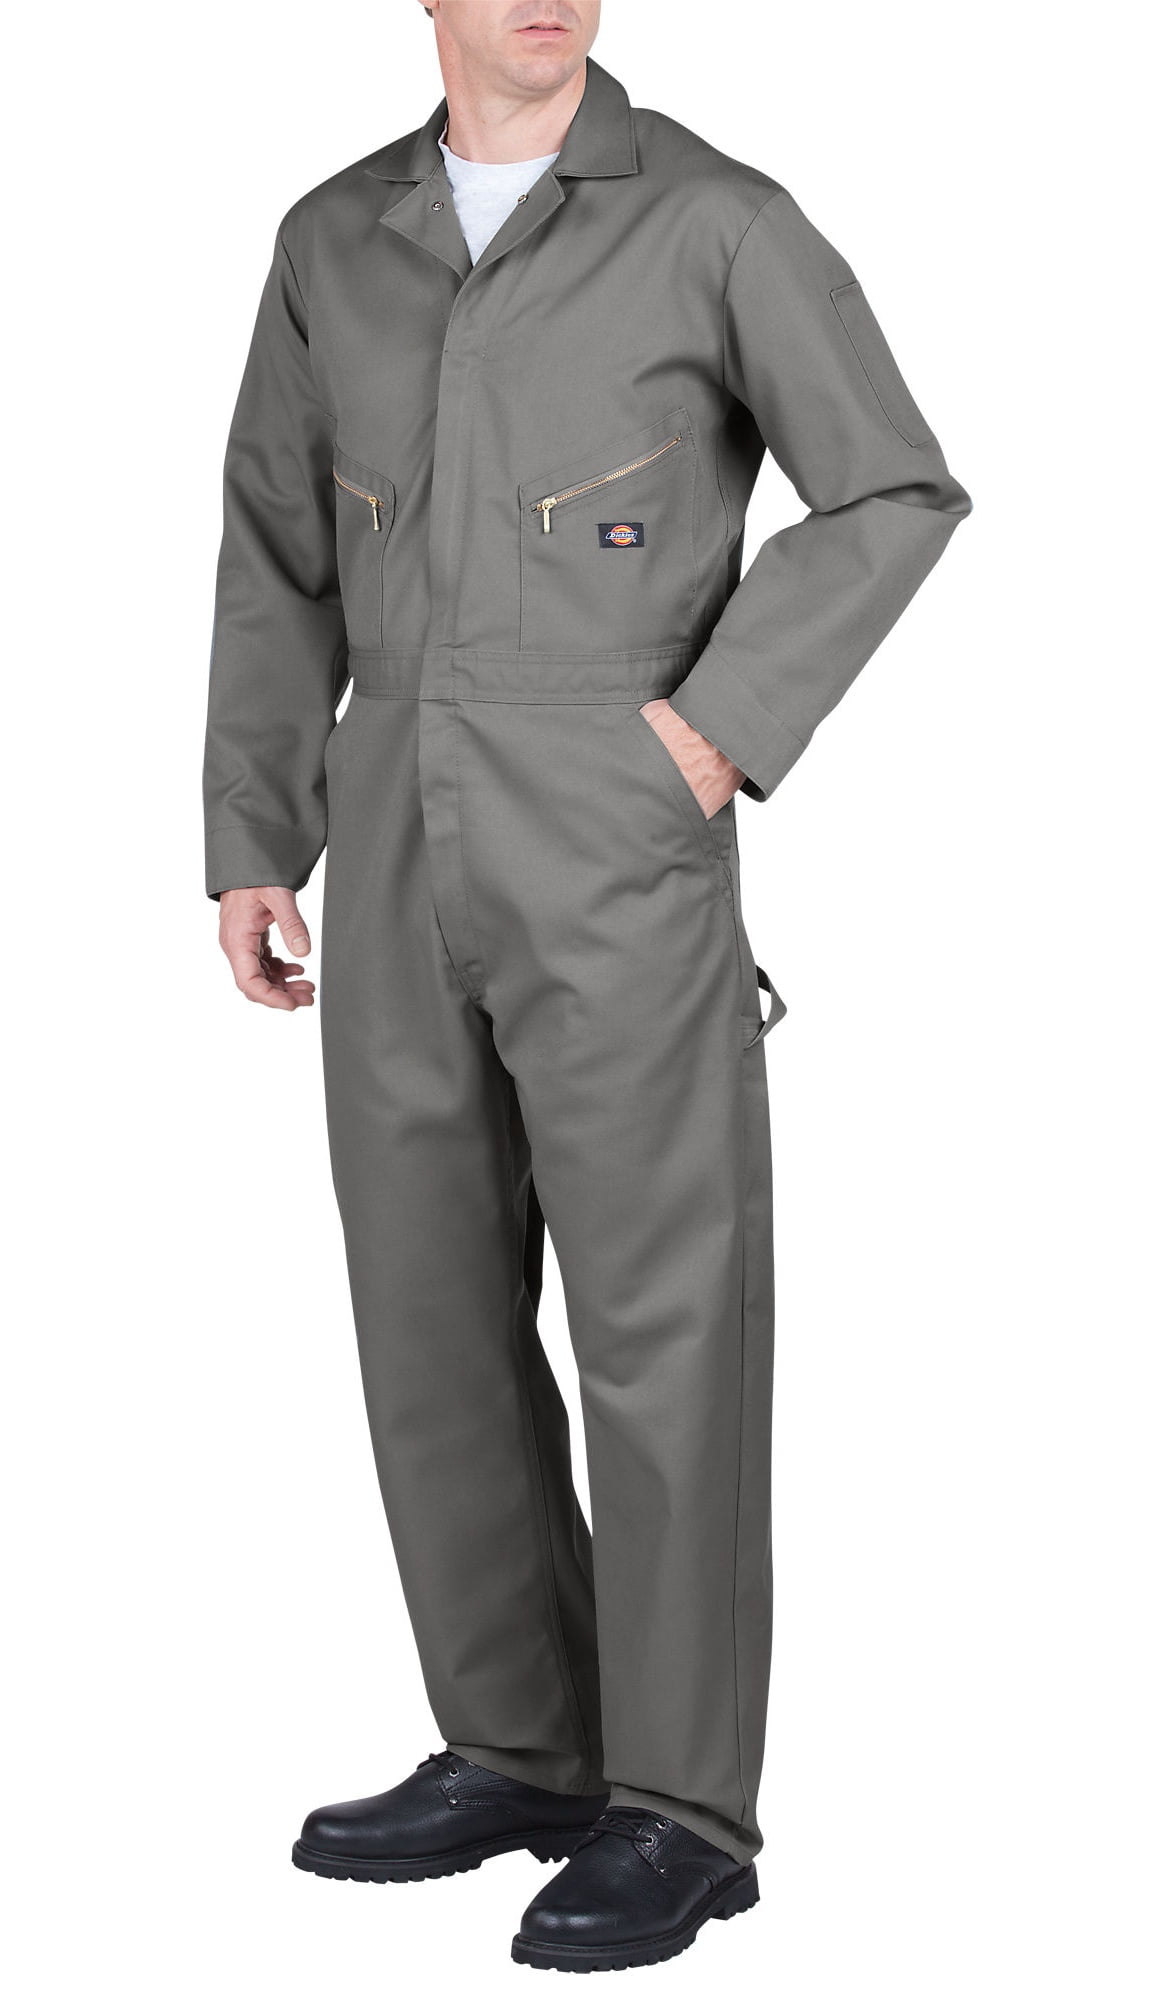 Men's Boiler Suit Overall Coverall Long Sleeves Workwear Safety Protection S-XXL 